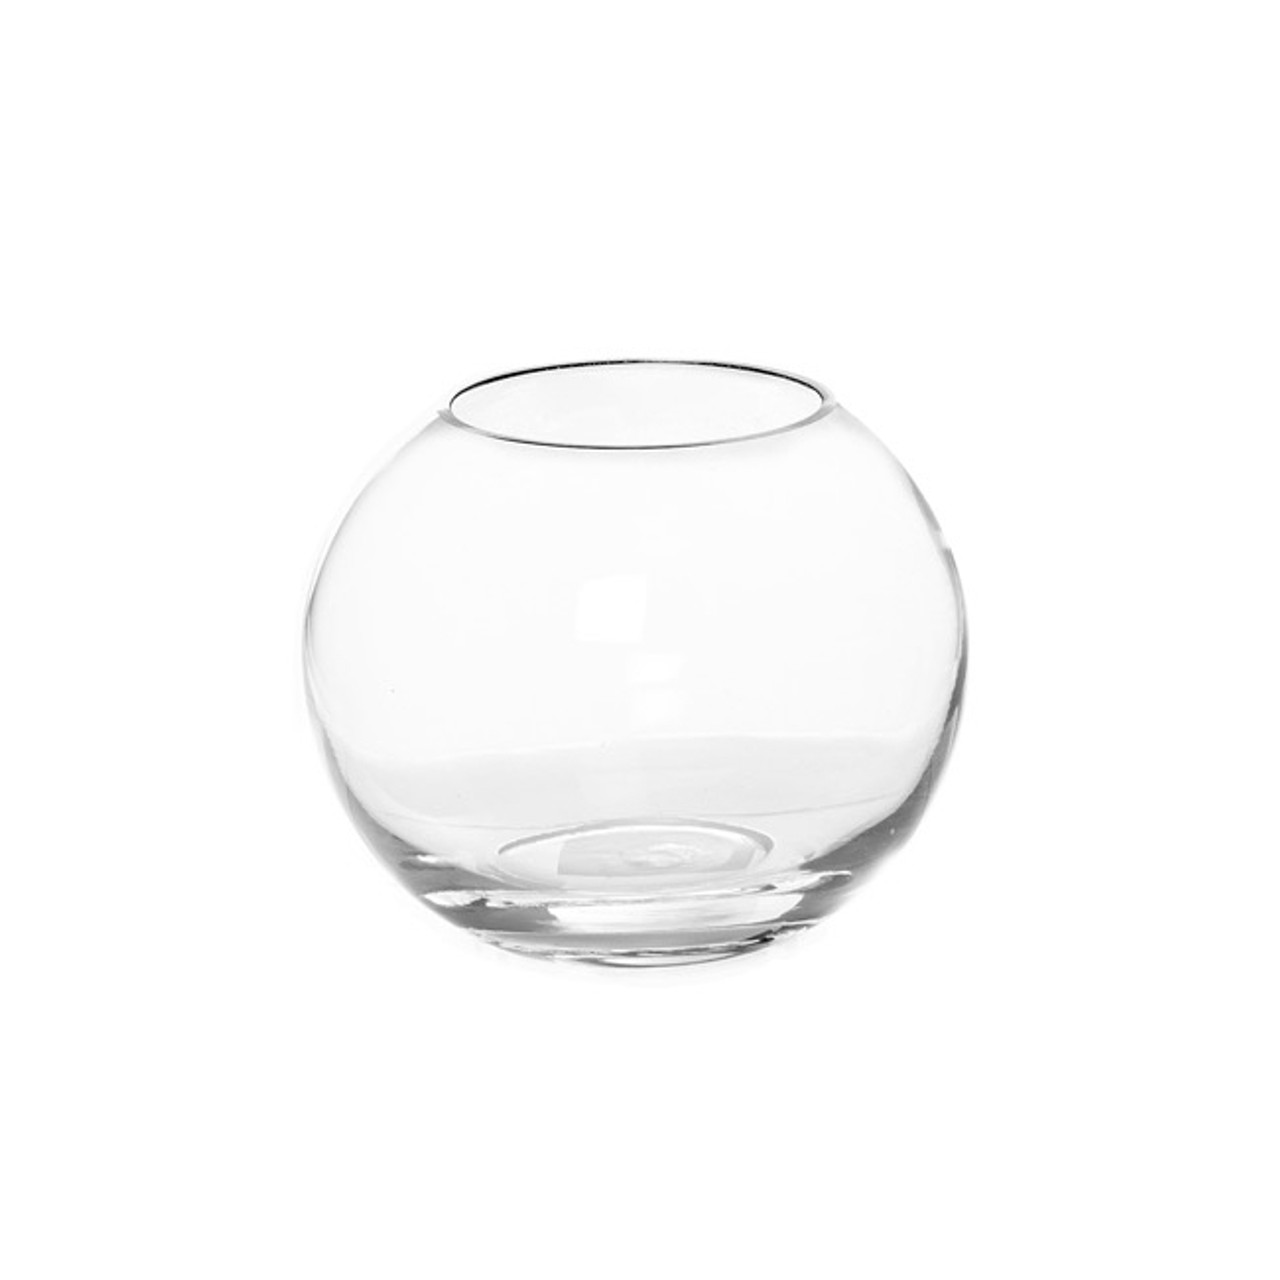 Vases - Glass Fish Bowl Small - Botanique Flowers and Gifts